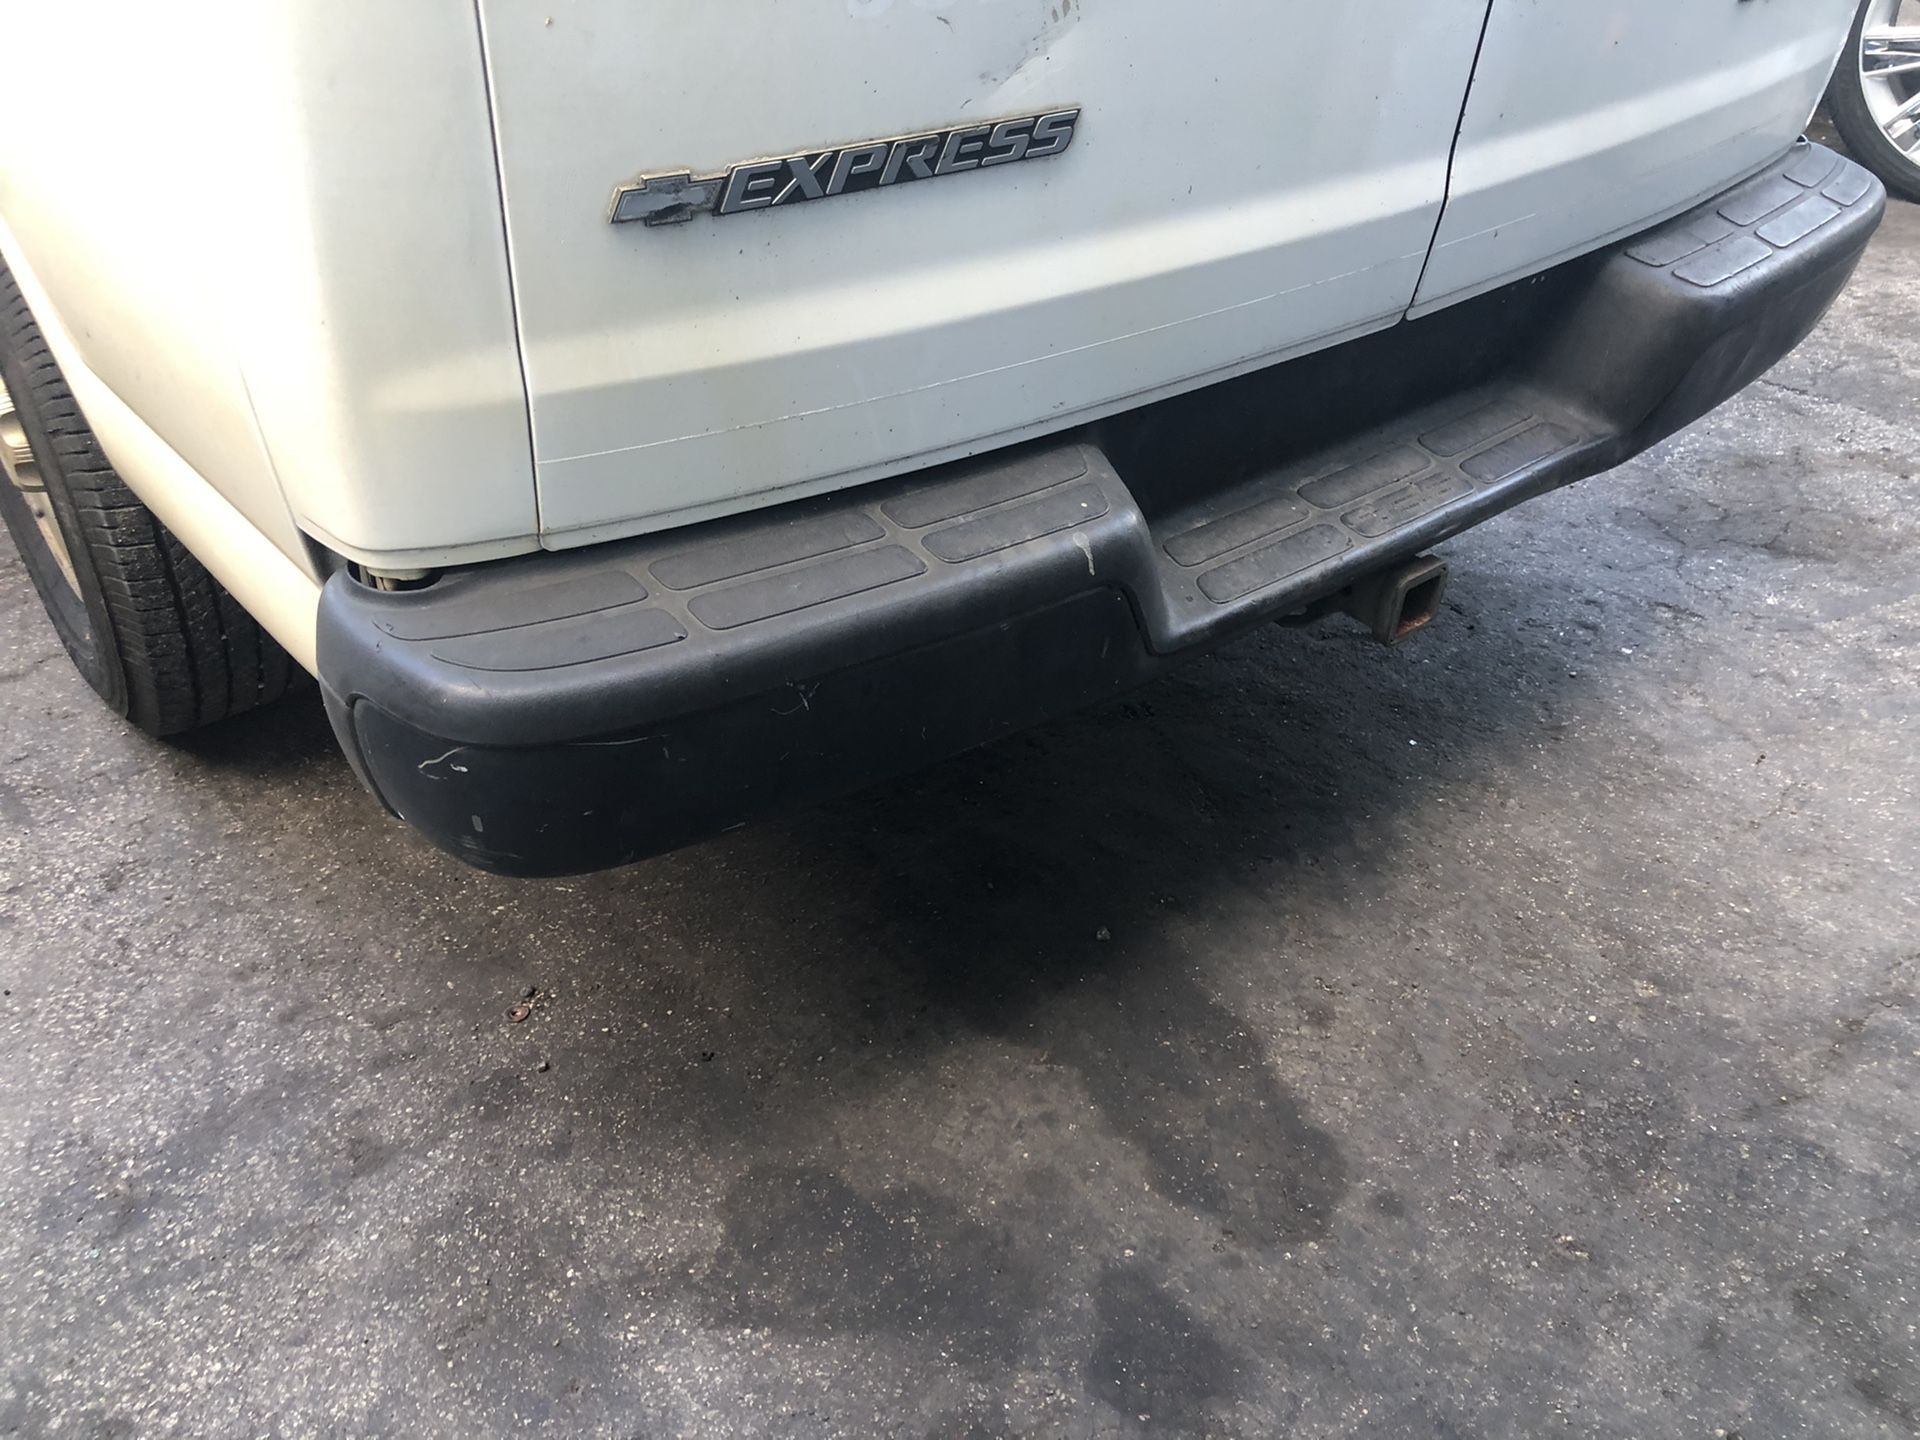 Express van rear bumper complete with all mounting hardware and plastics moldings and brackets all OEM GM parts GMC Savana